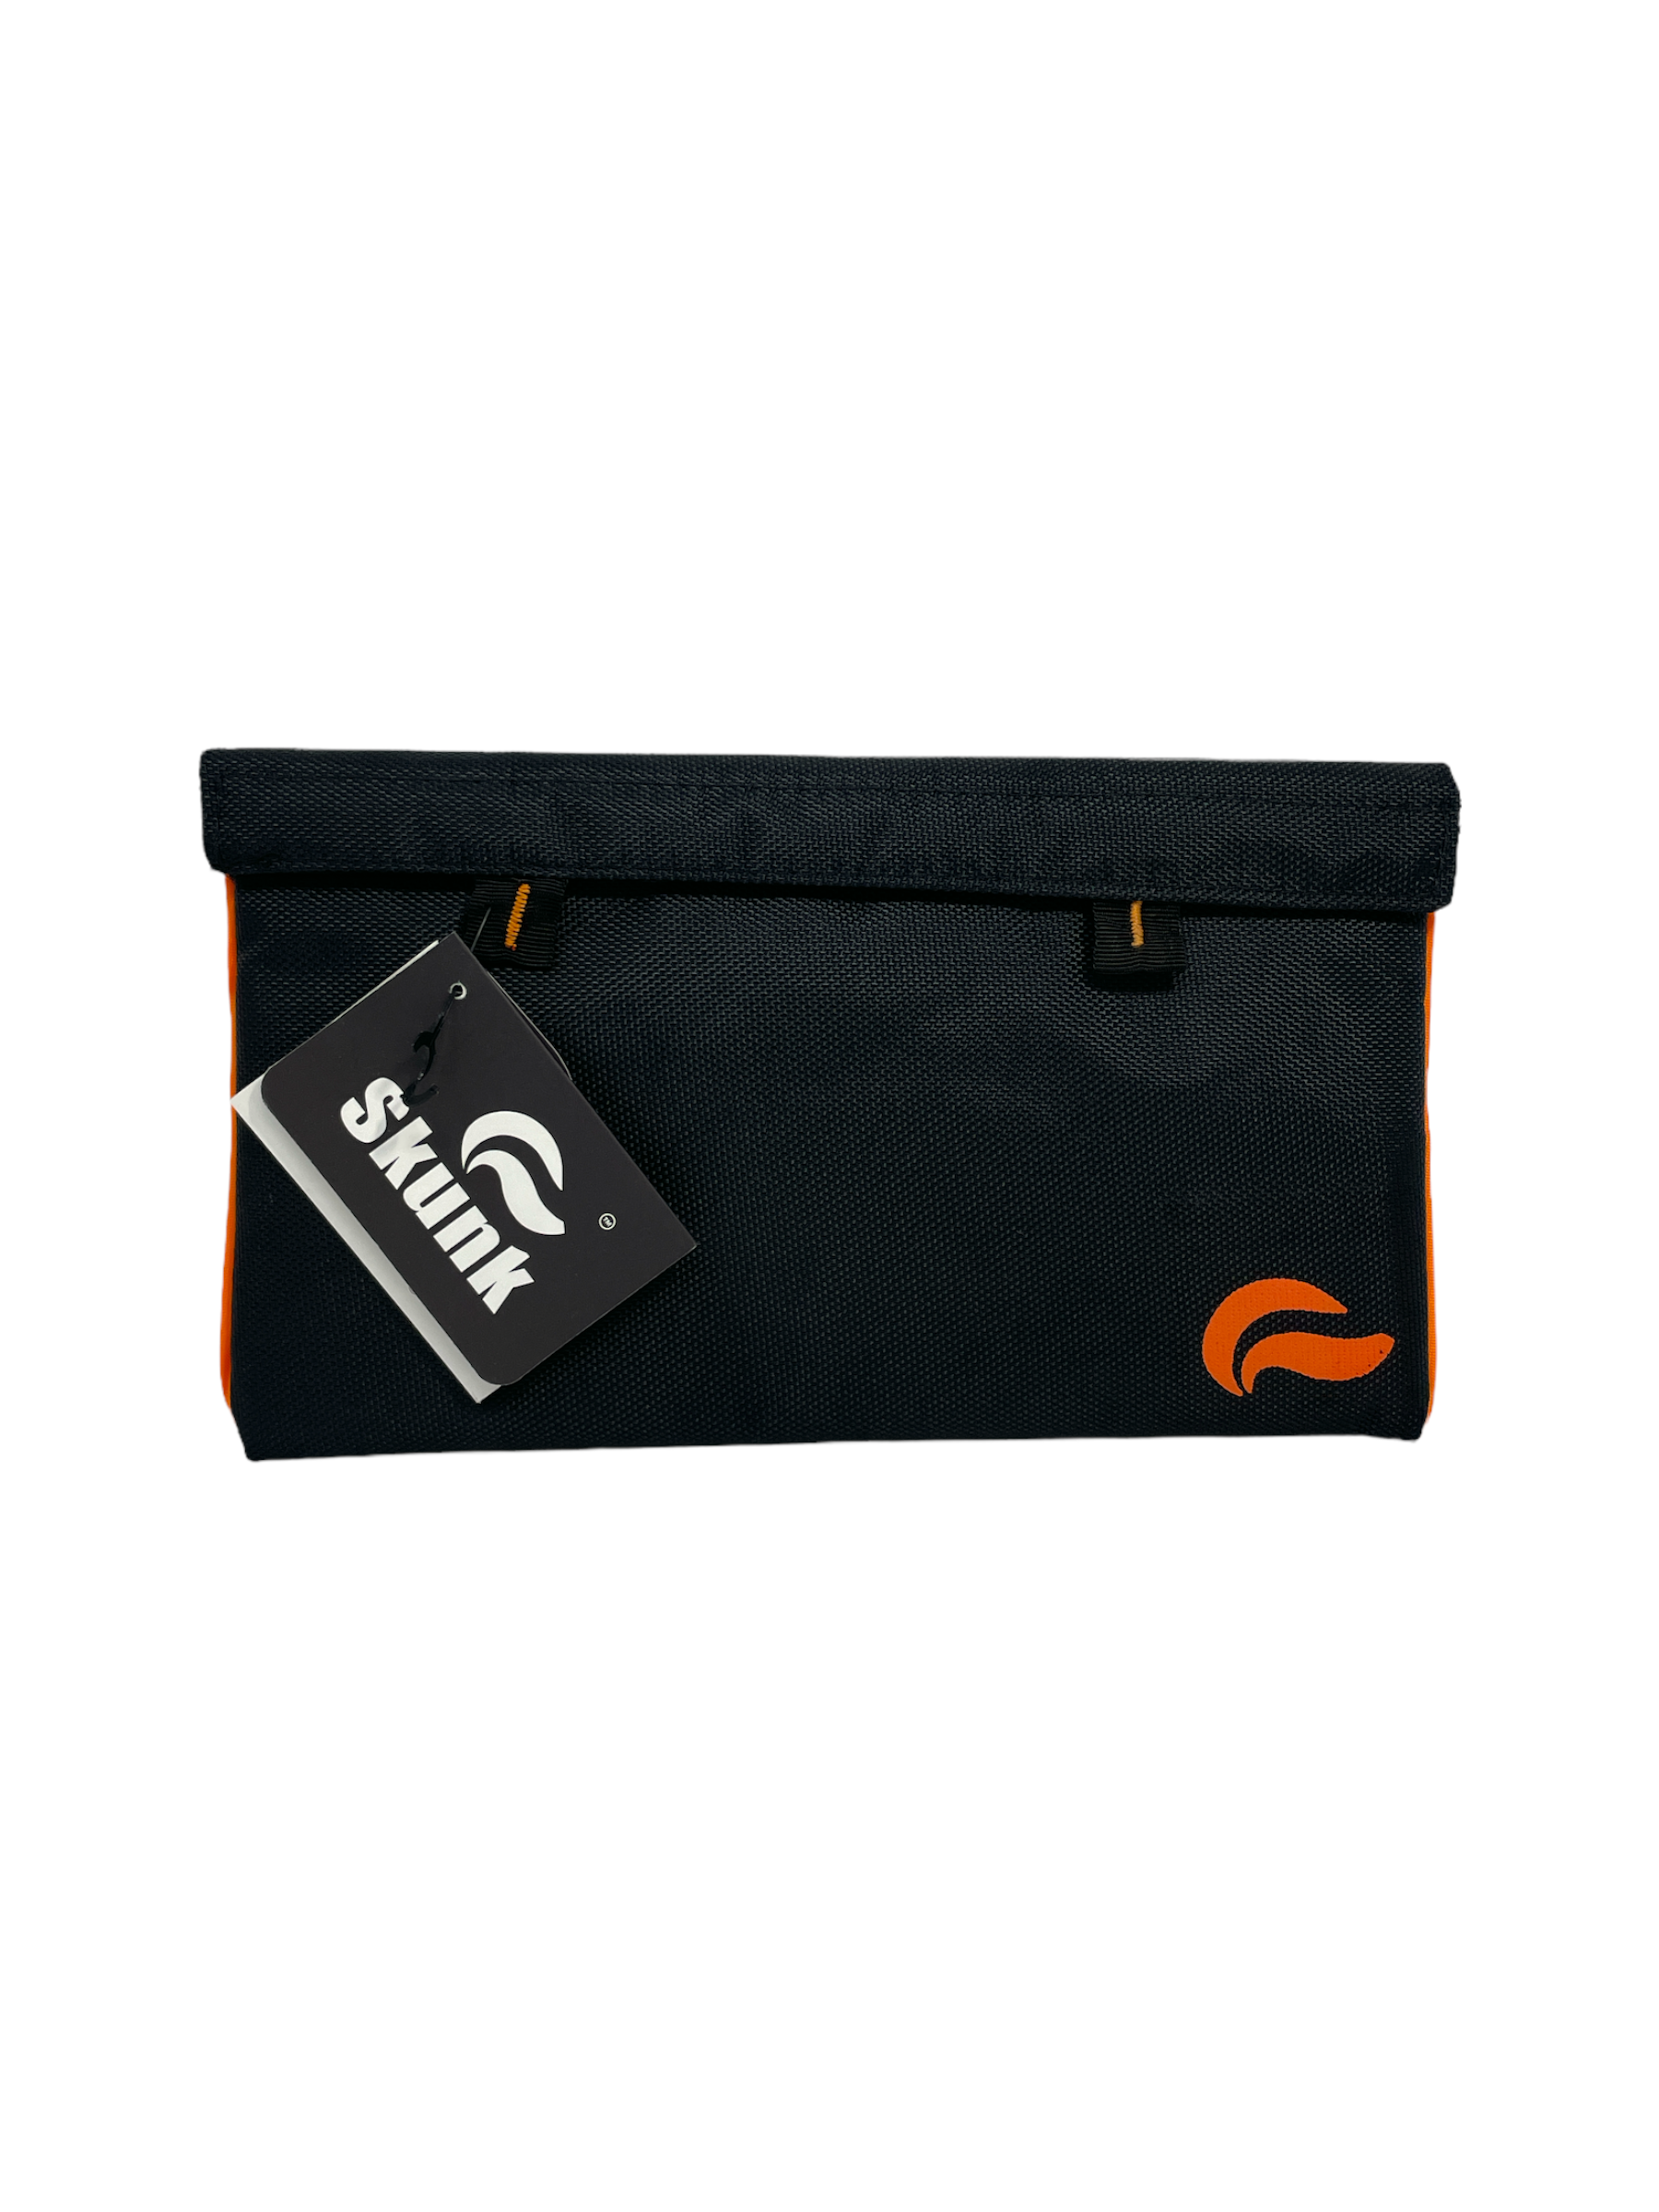 Skunk Smell Proof Bags